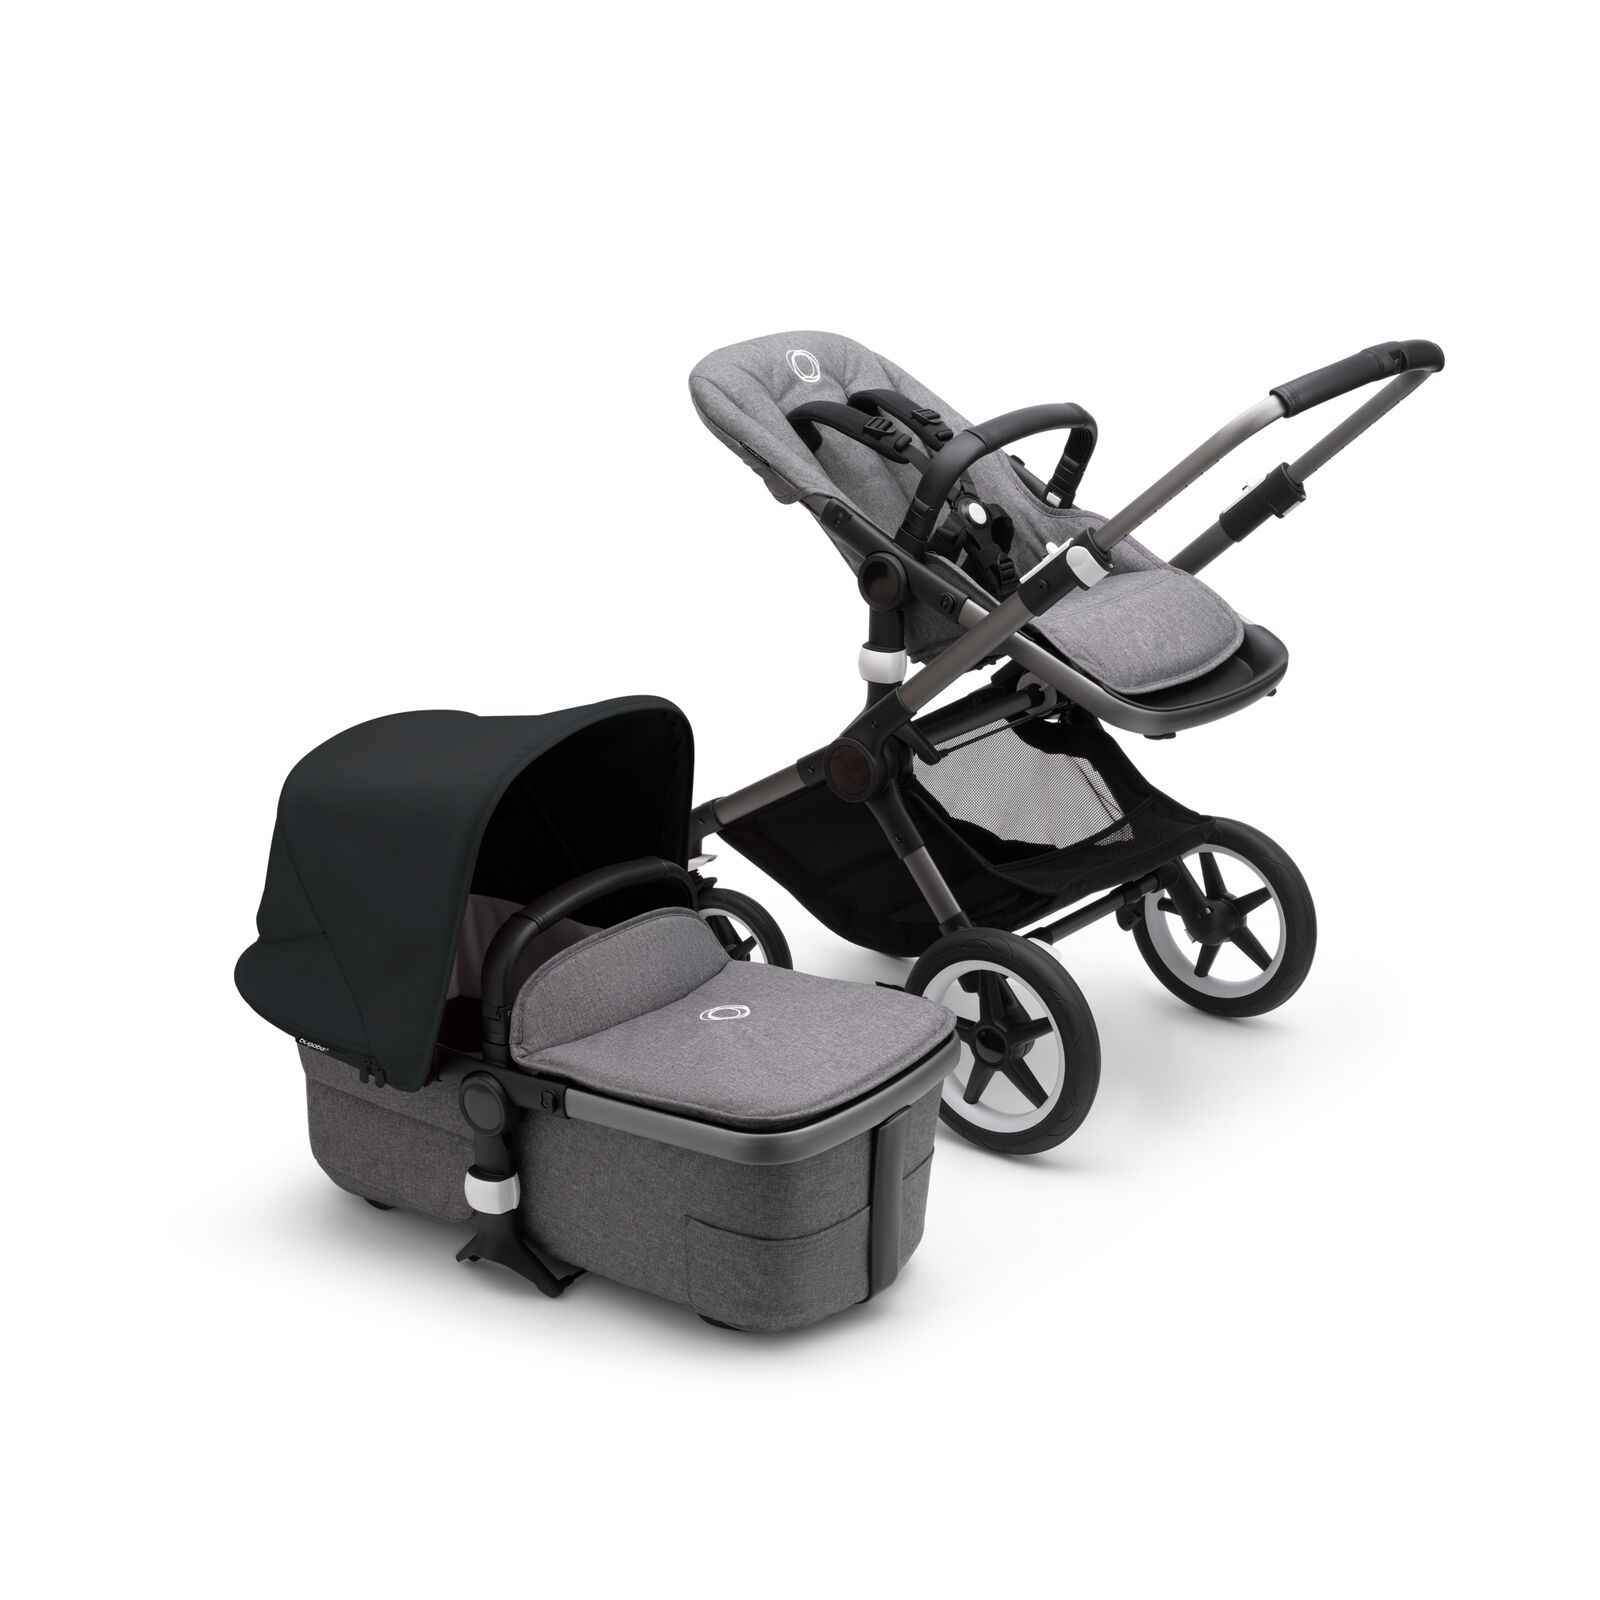 Bugaboo Fox 3 bassinet and seat stroller with graphite frame, grey melange fabrics, and black sun canopy.